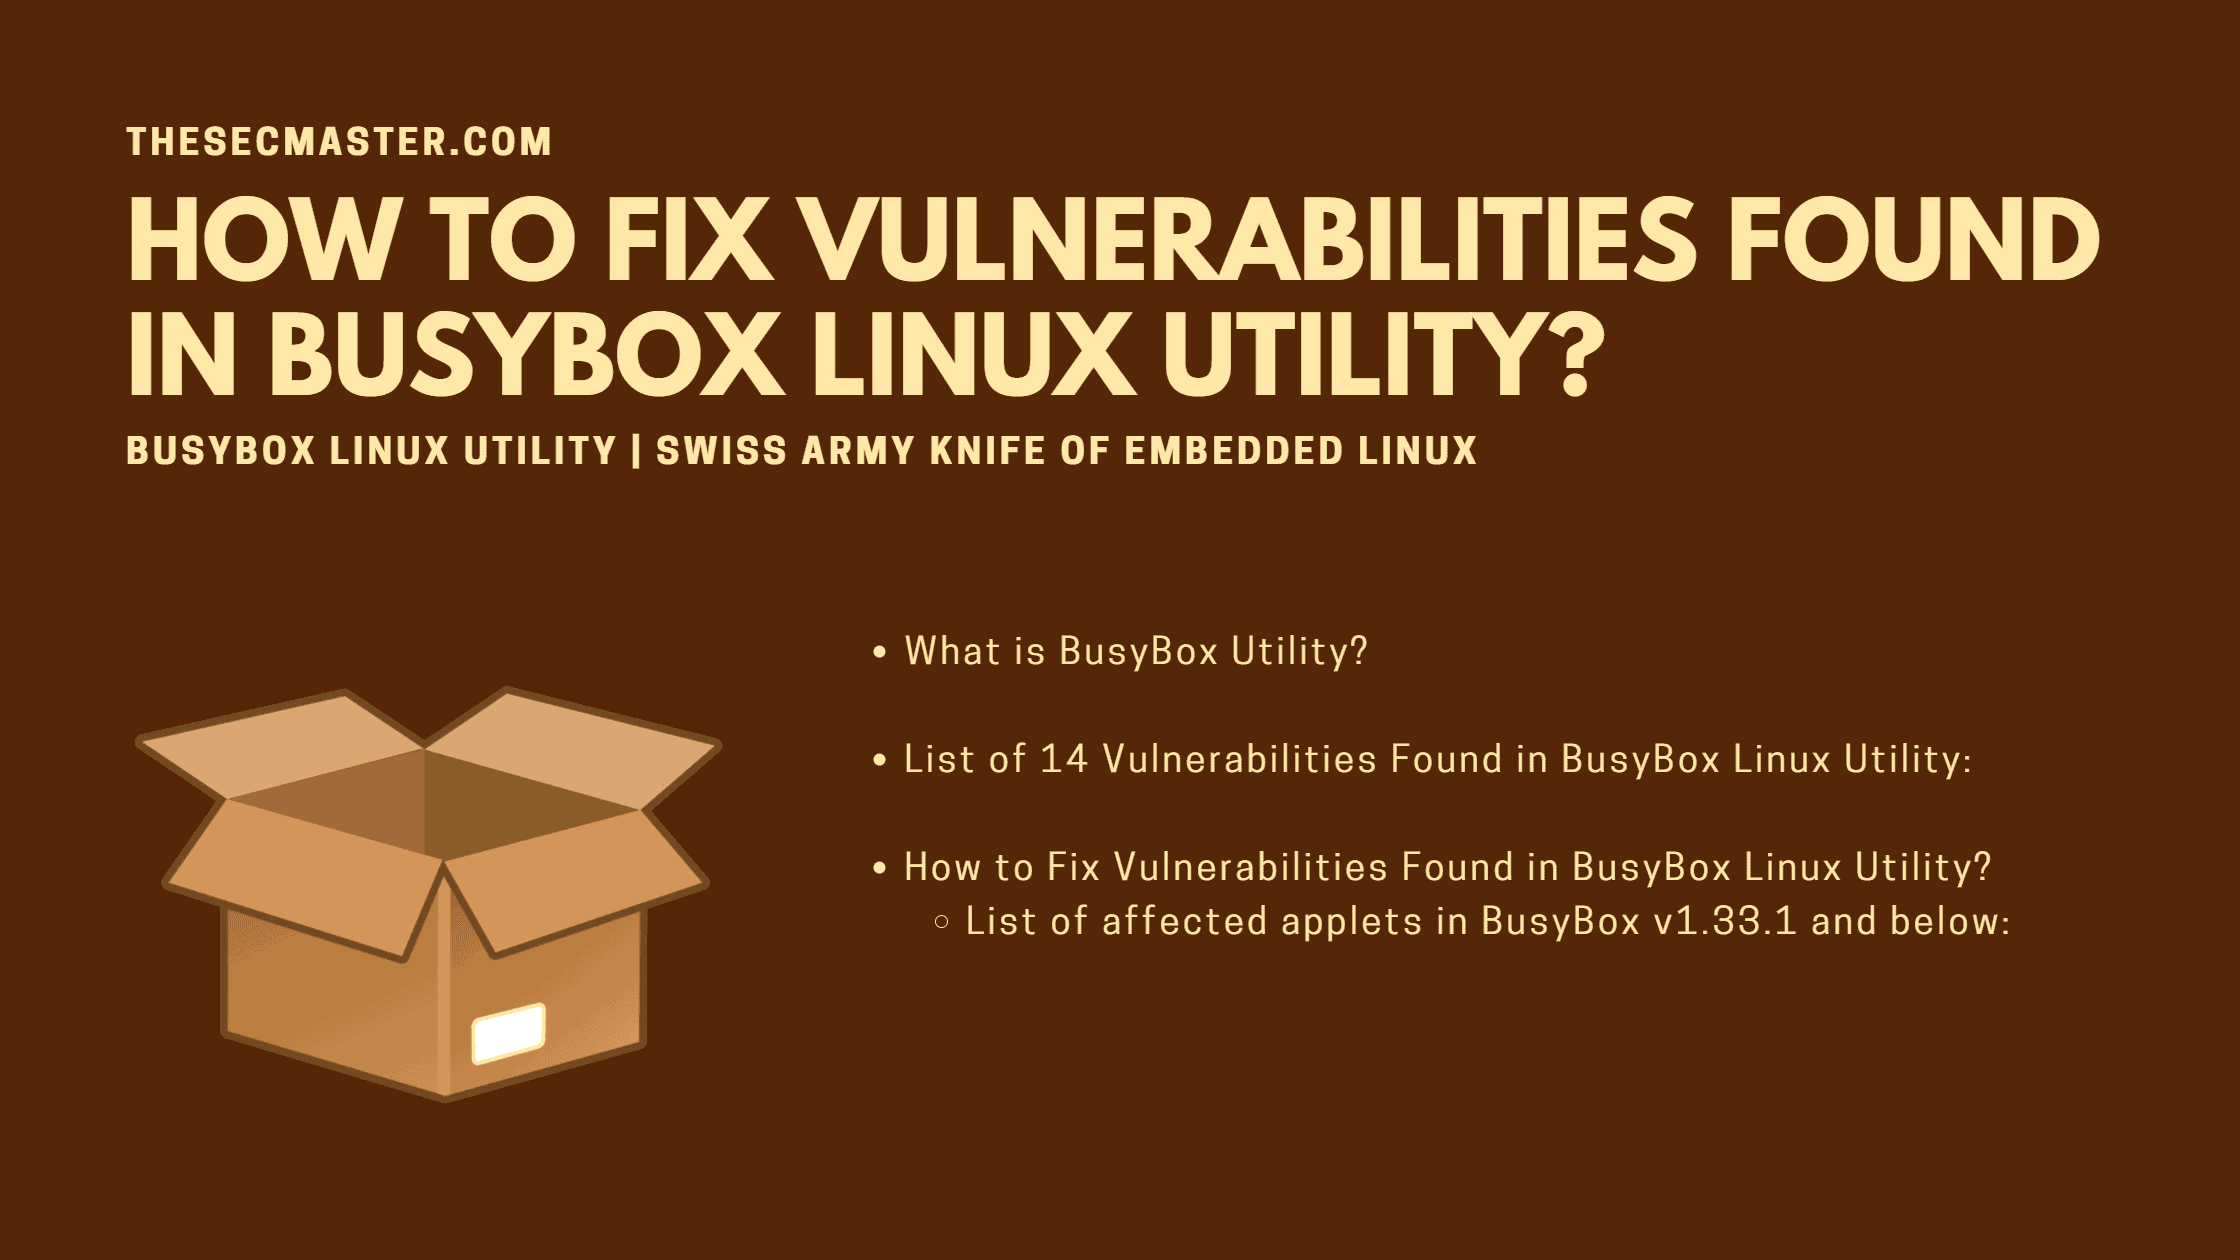 How To Fix Vulnerabilities Found In Busybox Linux Utility